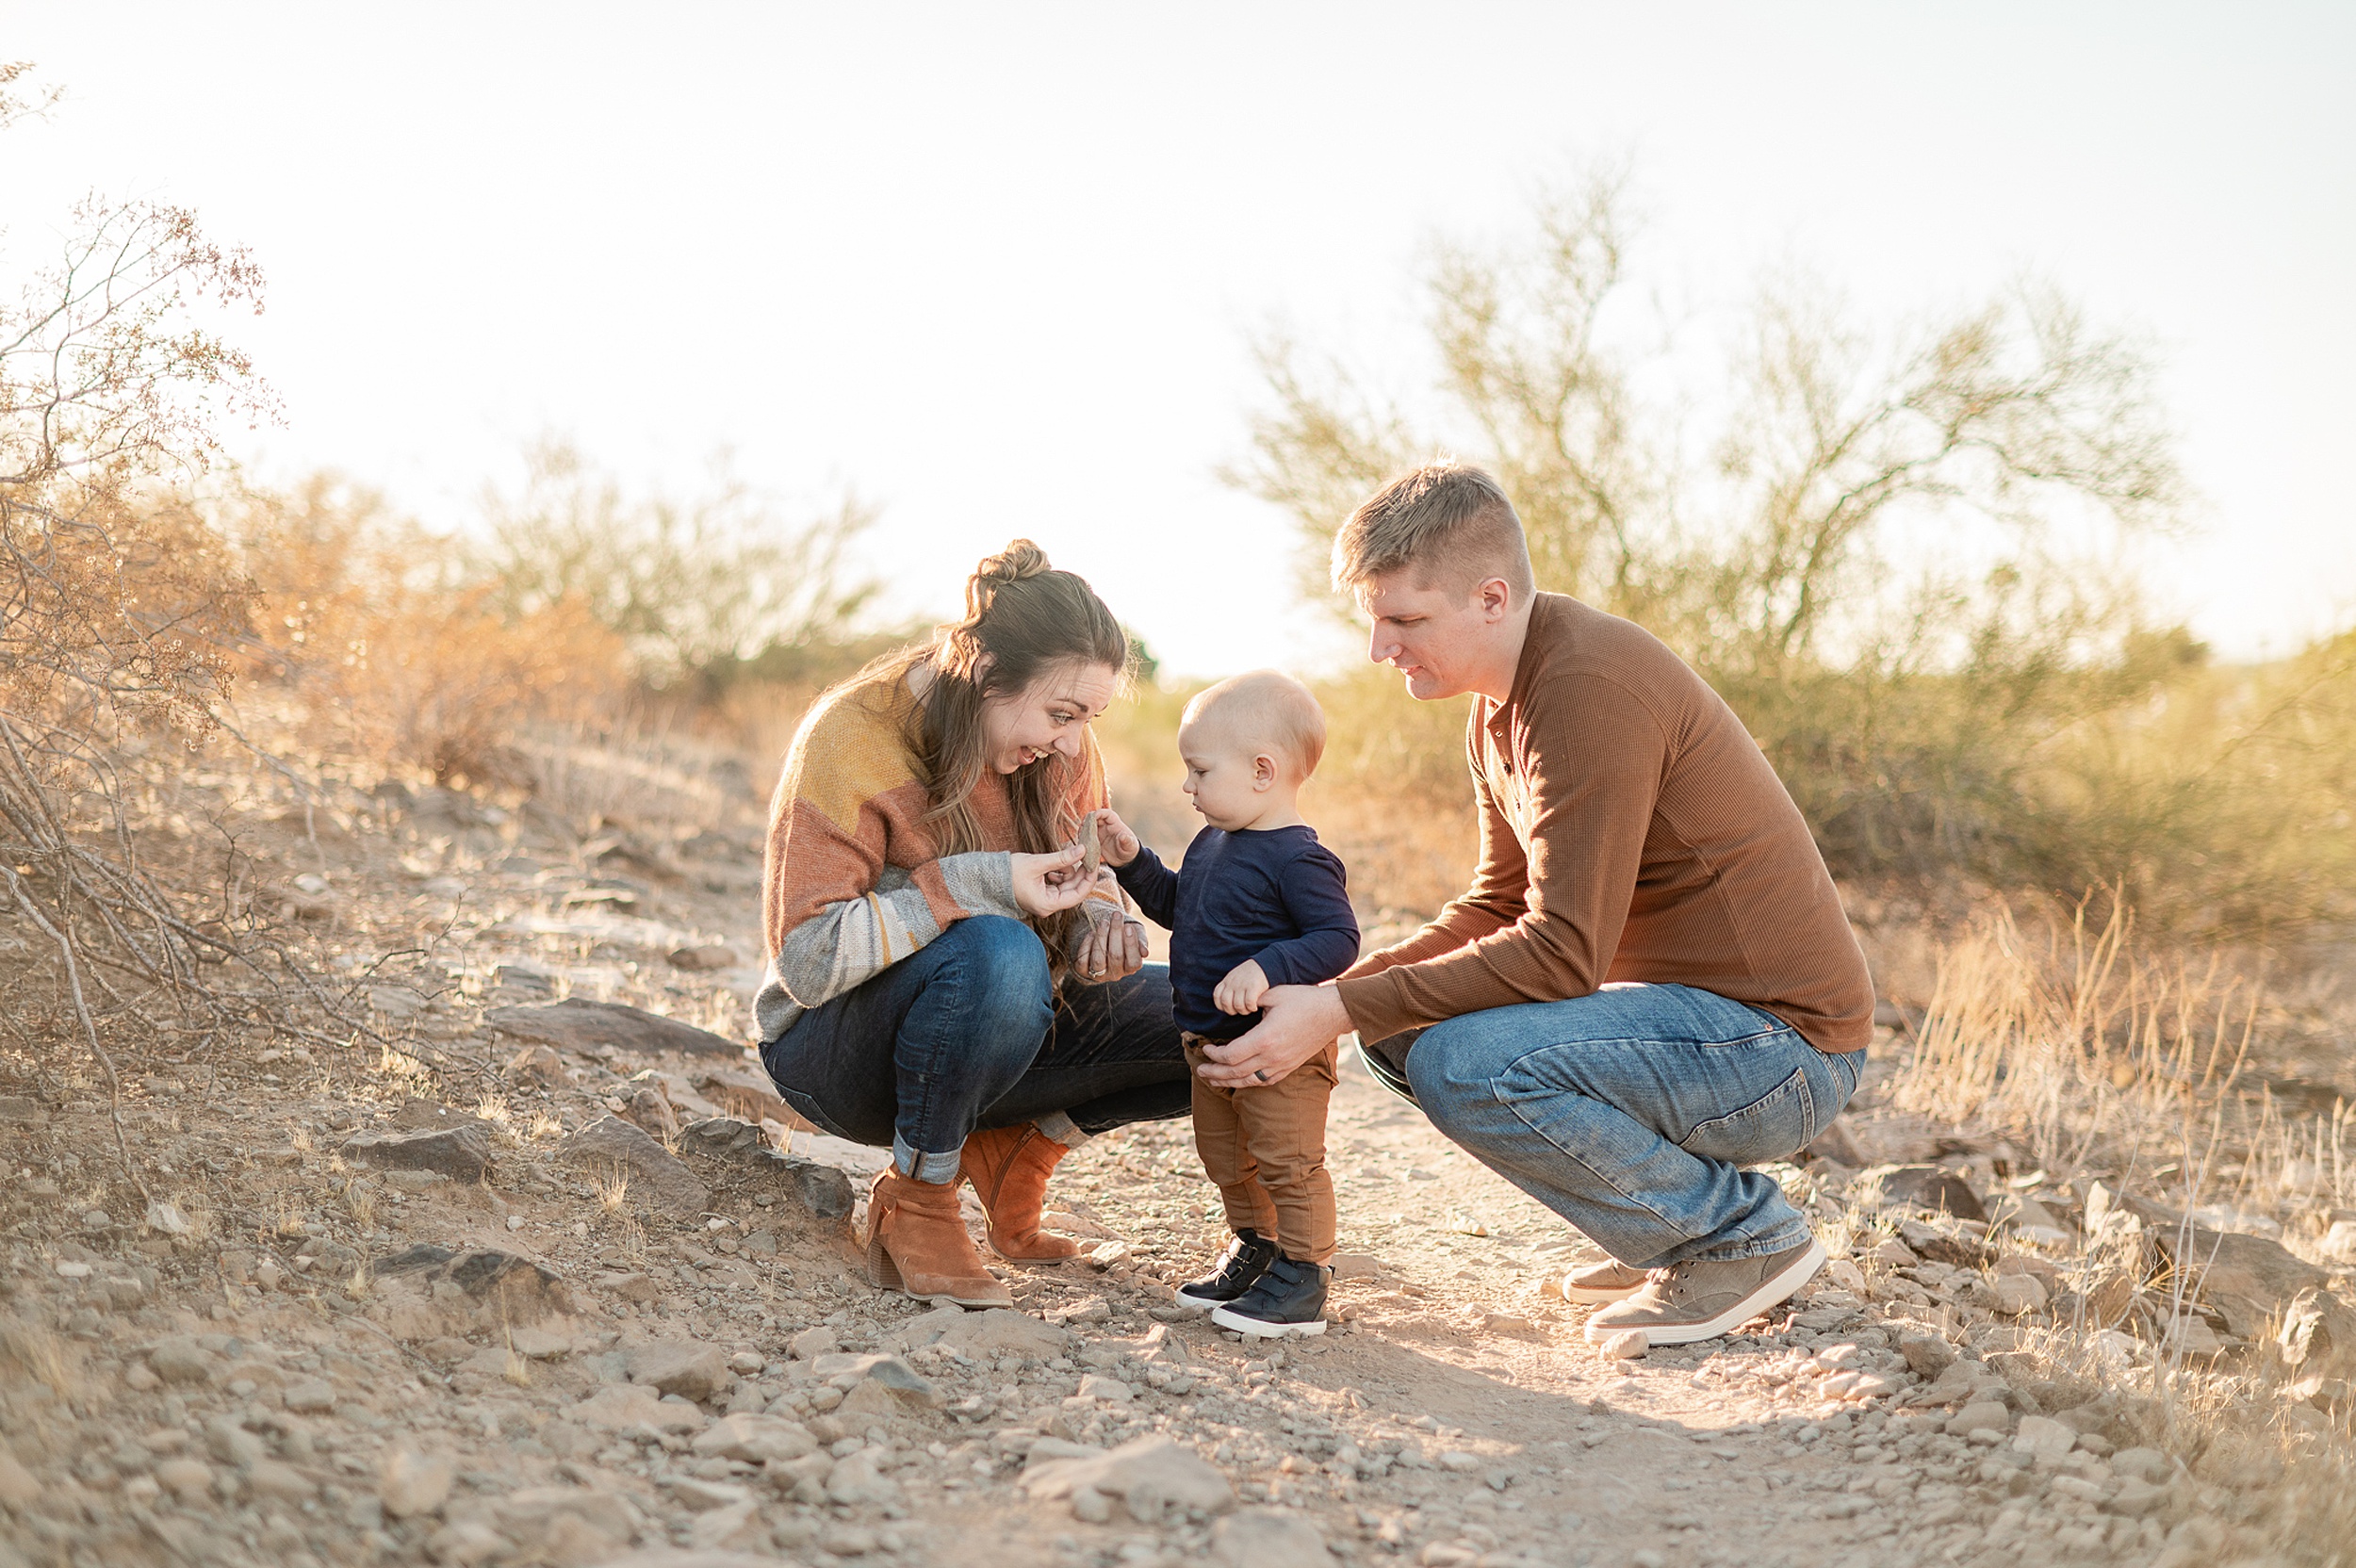 A mom and dad squat and explore a desert path with their toddler son before visiting scottsdale yoga studios